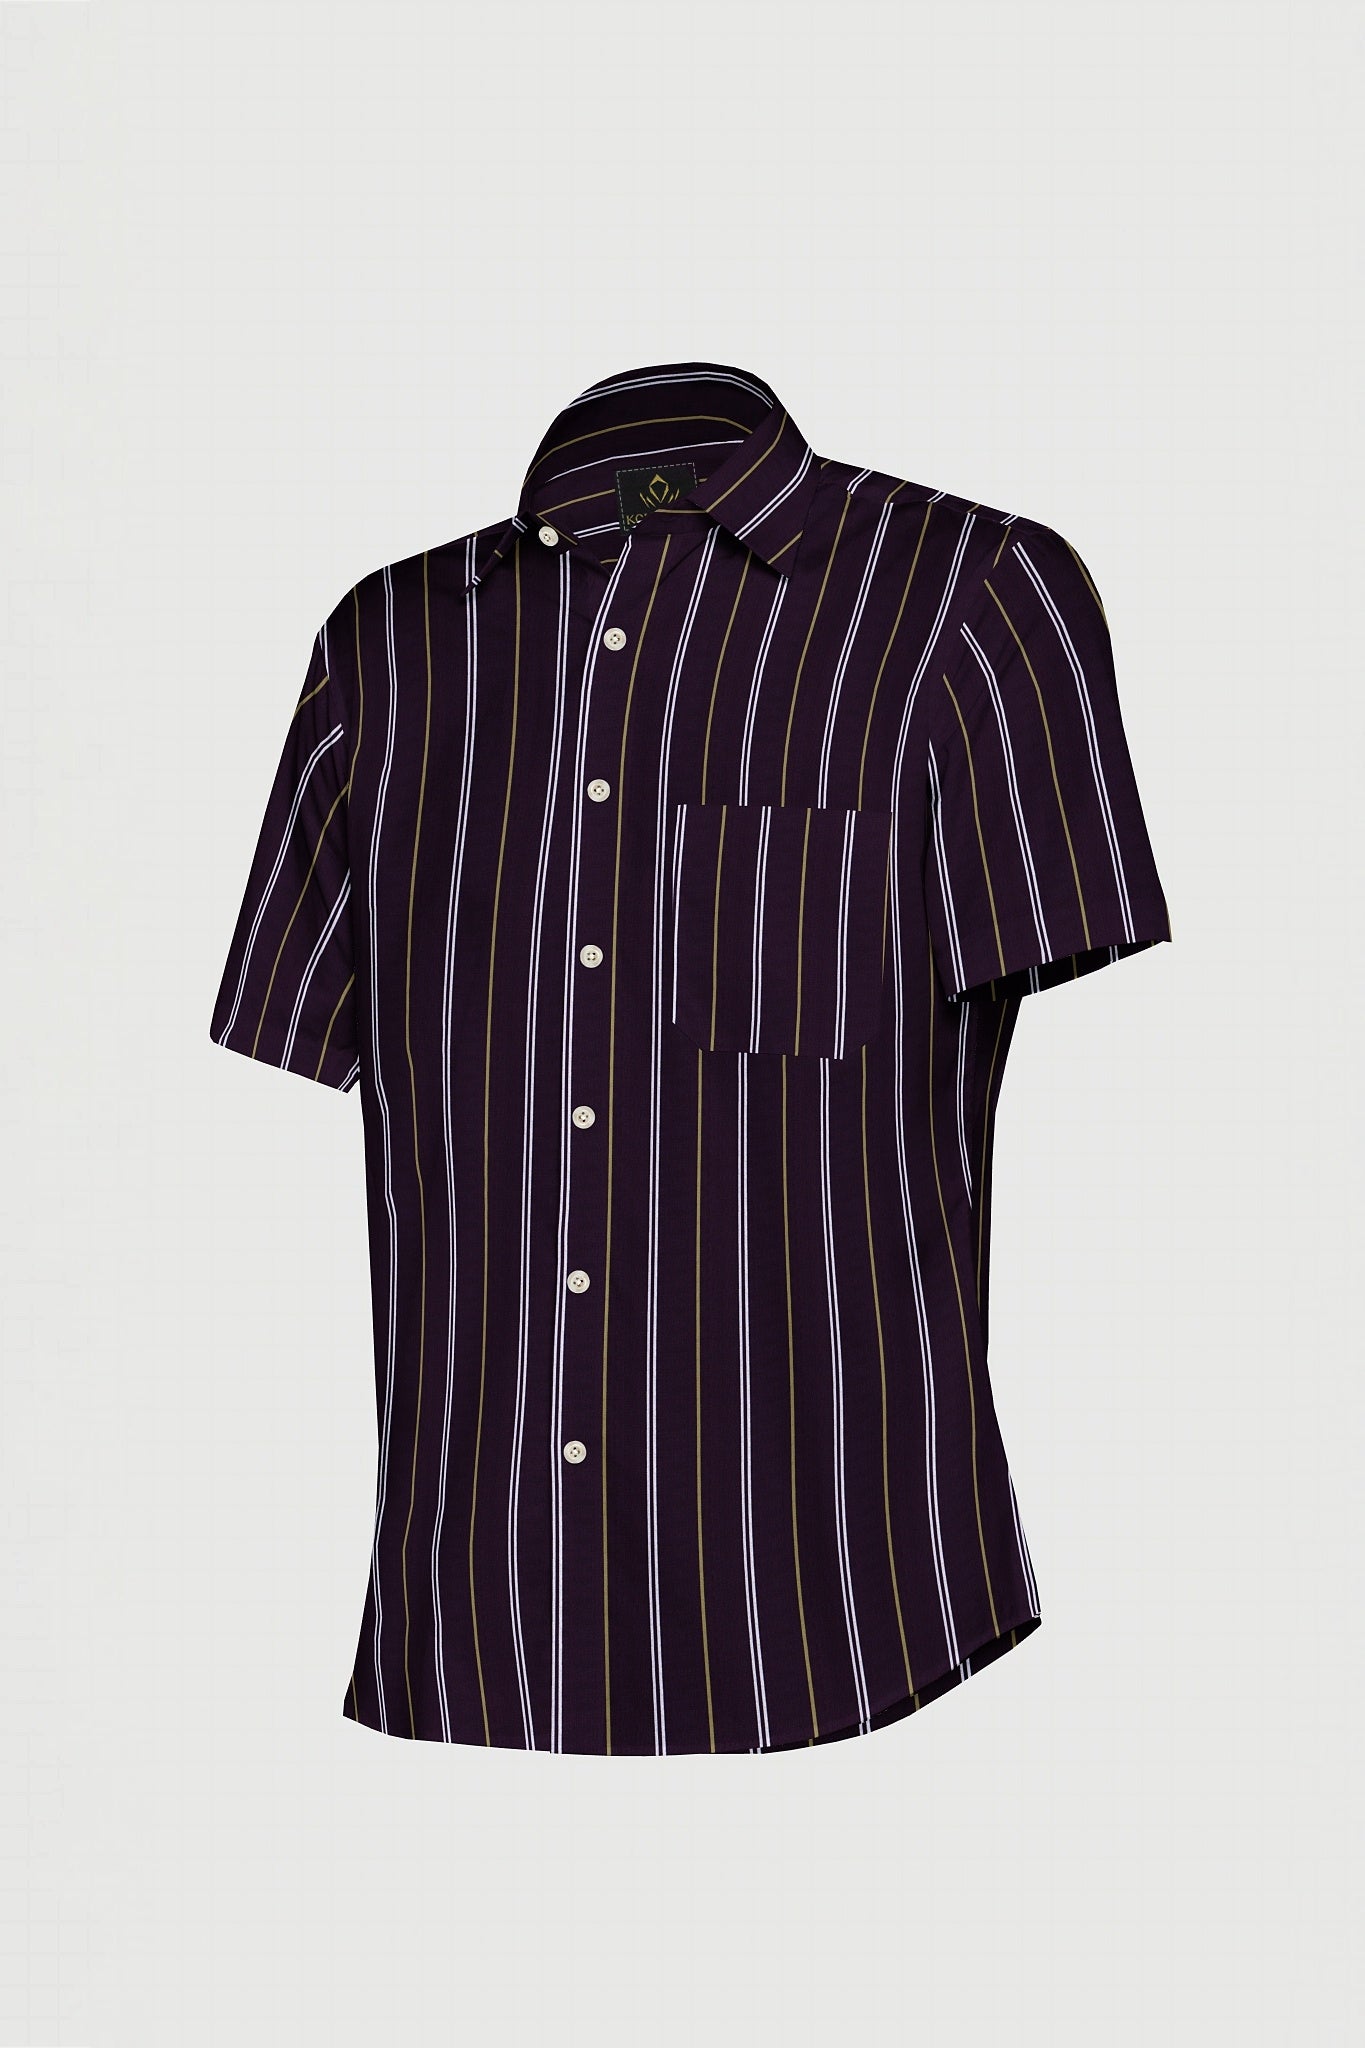 Prune Purple with Moth Cream and White Stripes Cotton Shirt